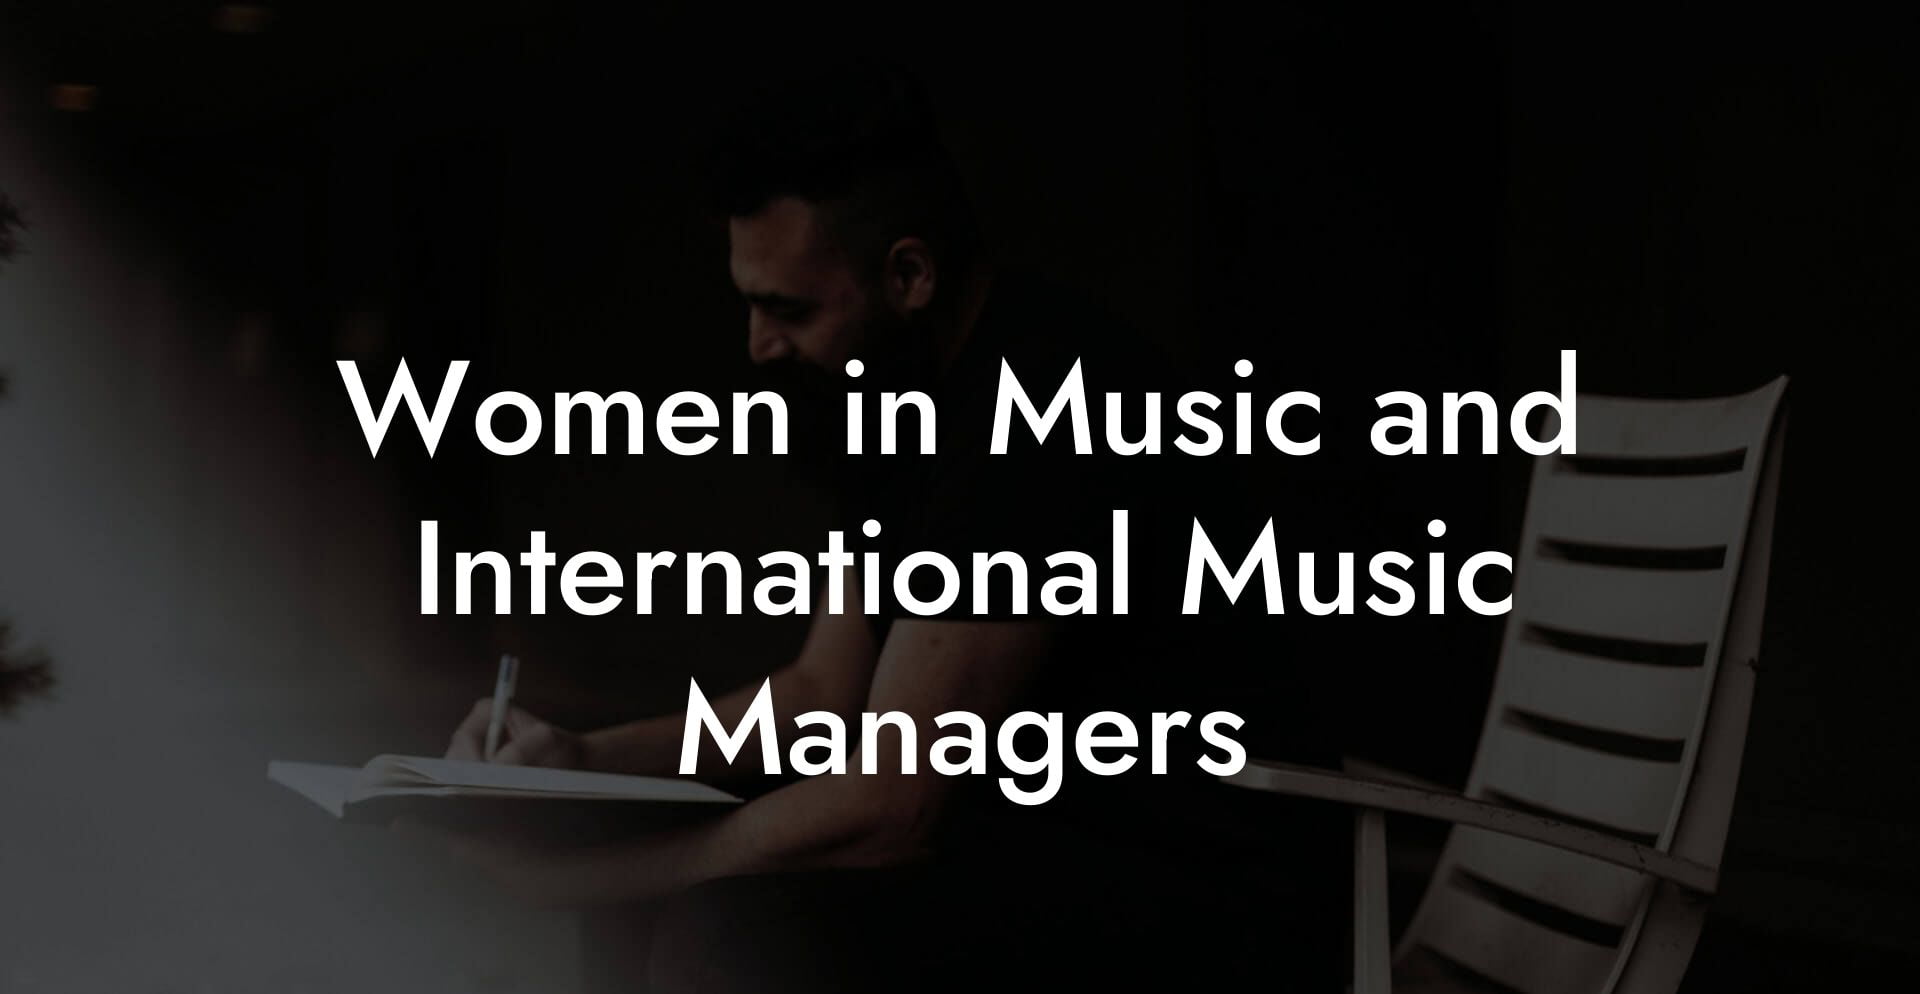 Women in Music and International Music Managers